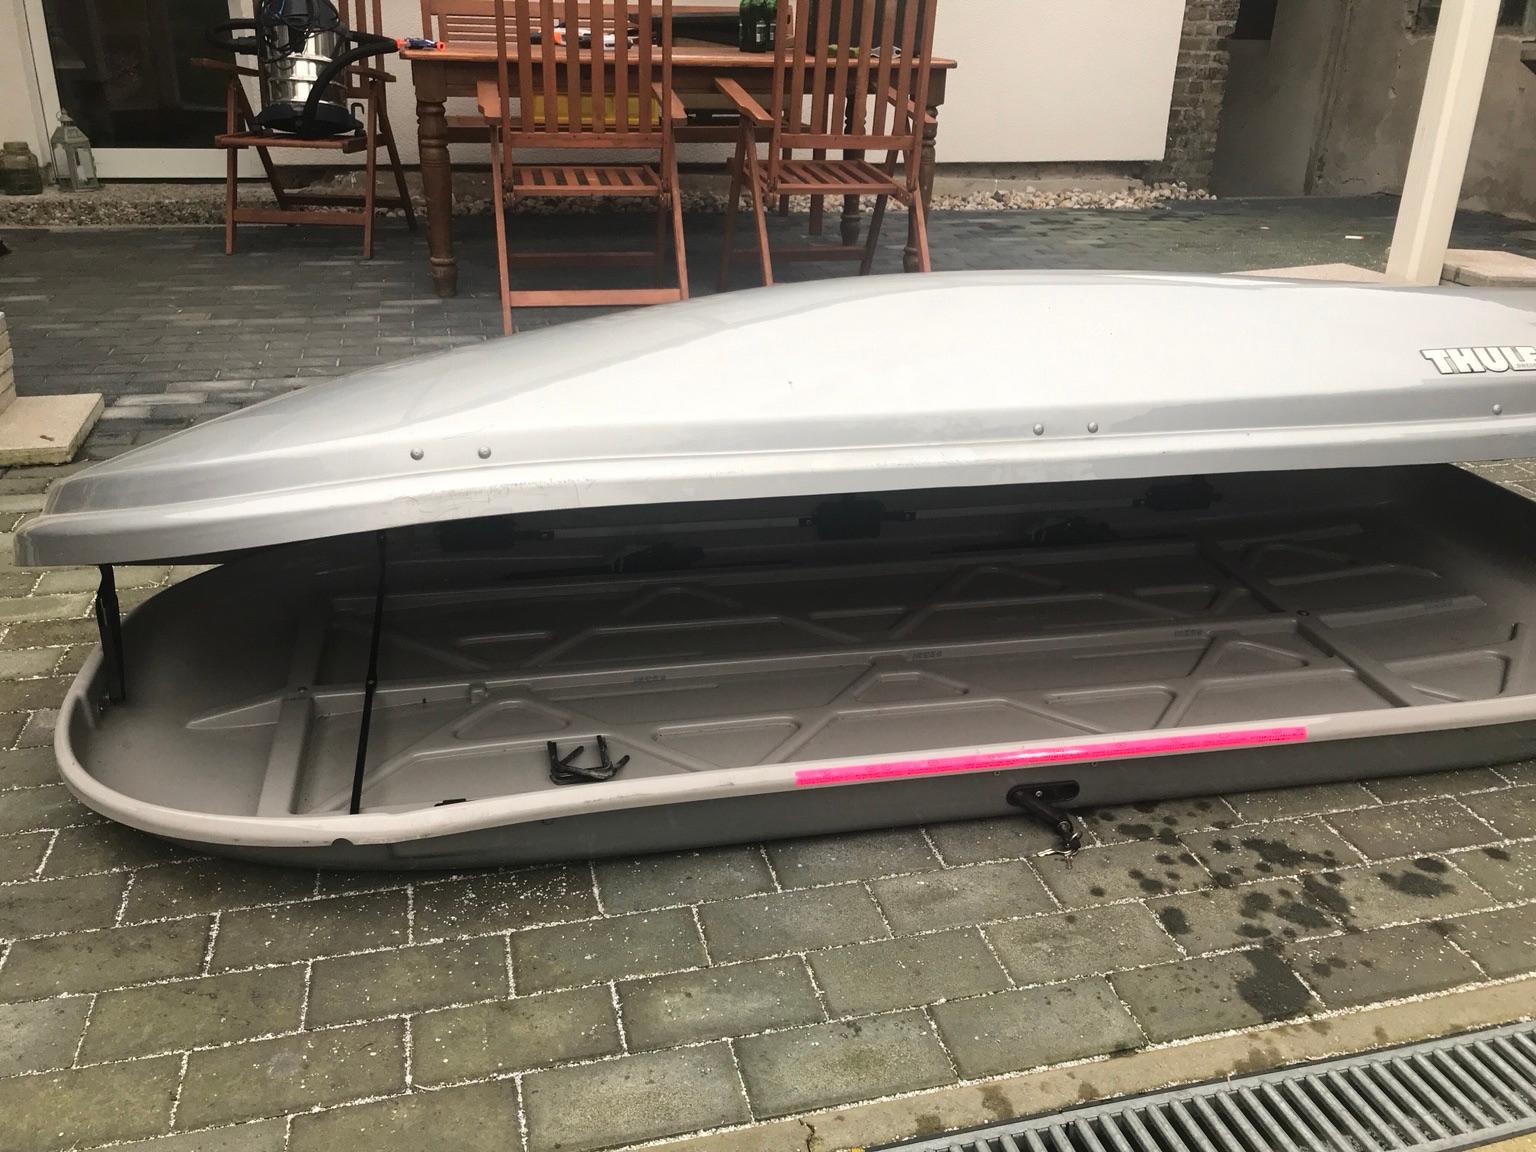 Thule Dachbox Vision 850 XXXL in 14542 Werder (Havel) for €190.00 for sale